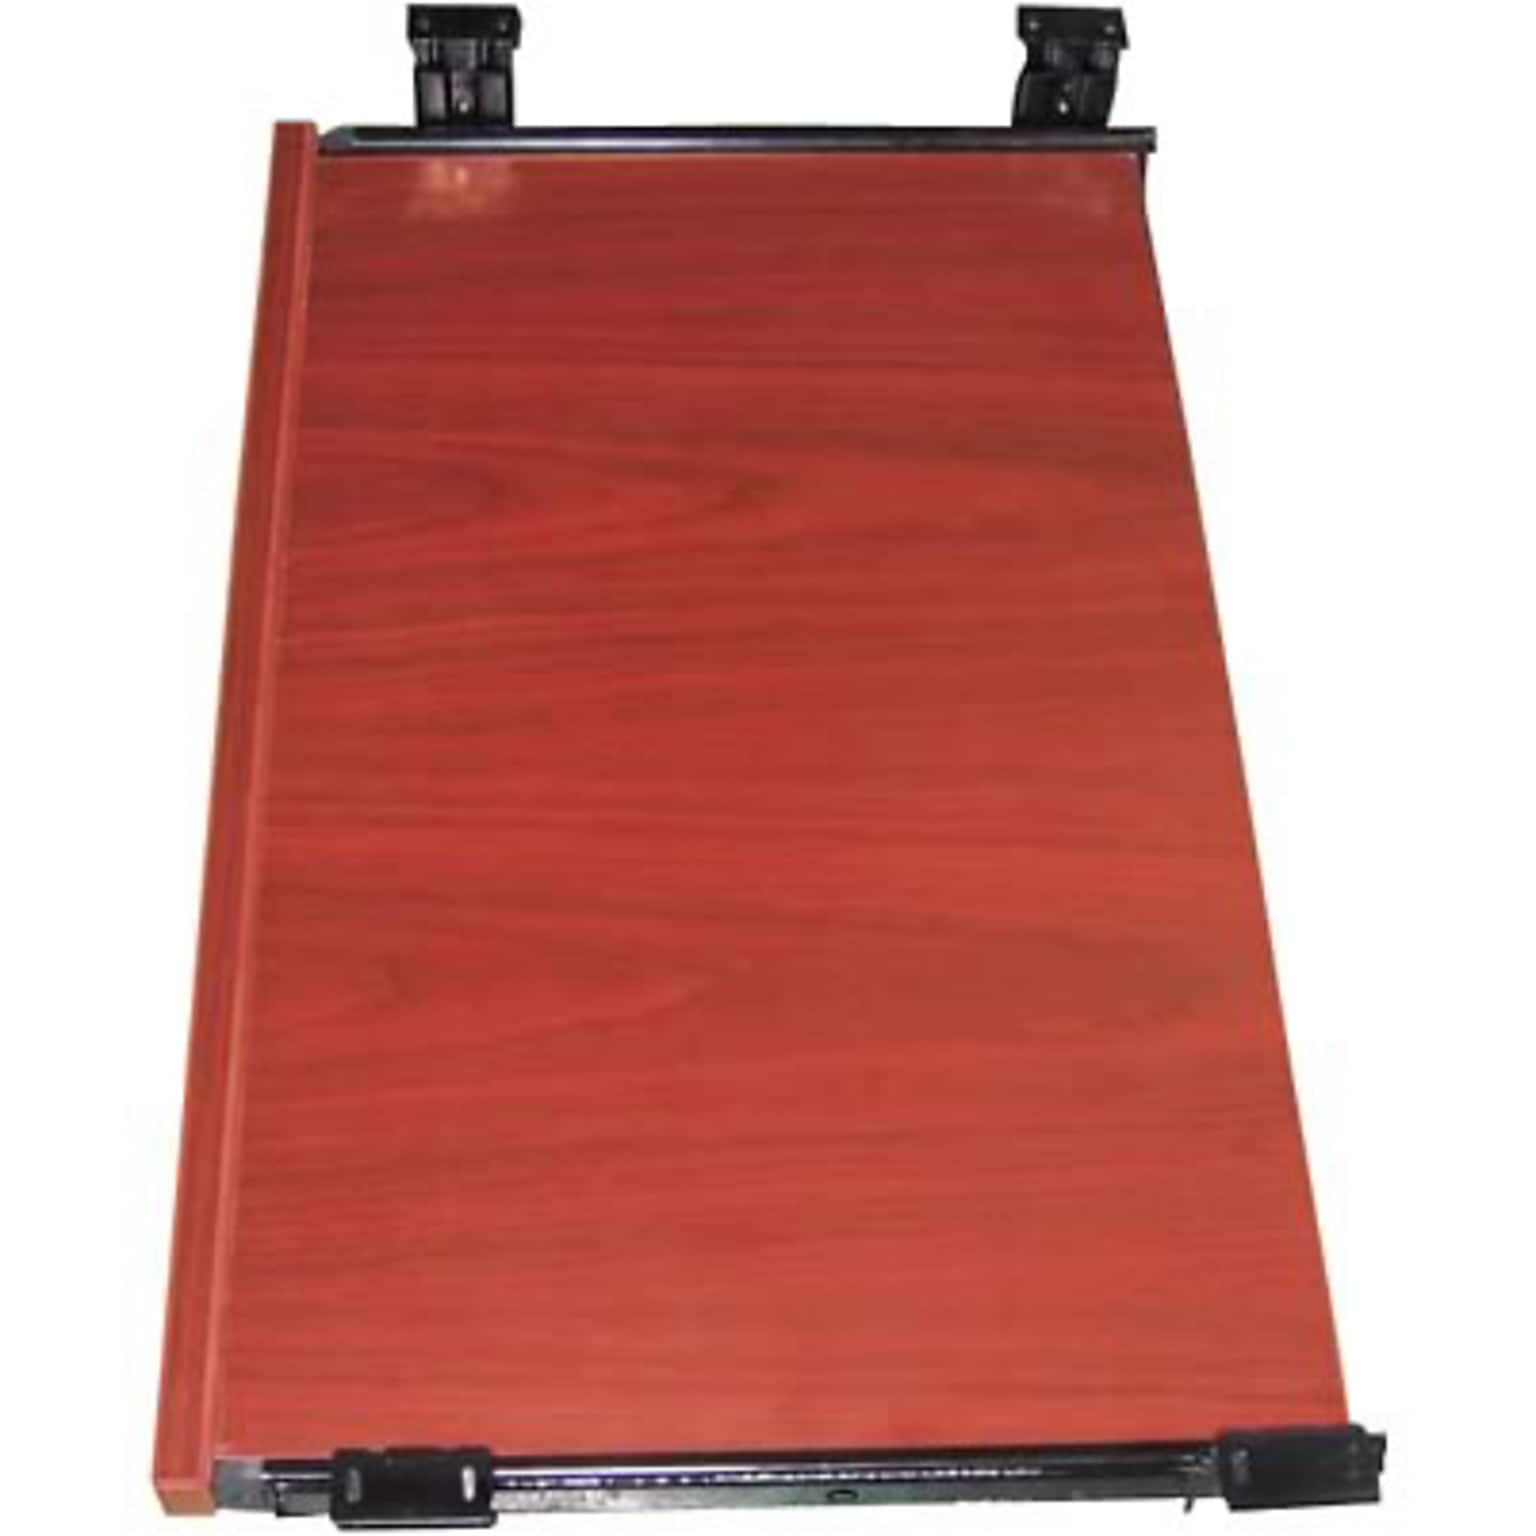 Boss® Laminate Collection in Cherry Finish; Keyboard Tray